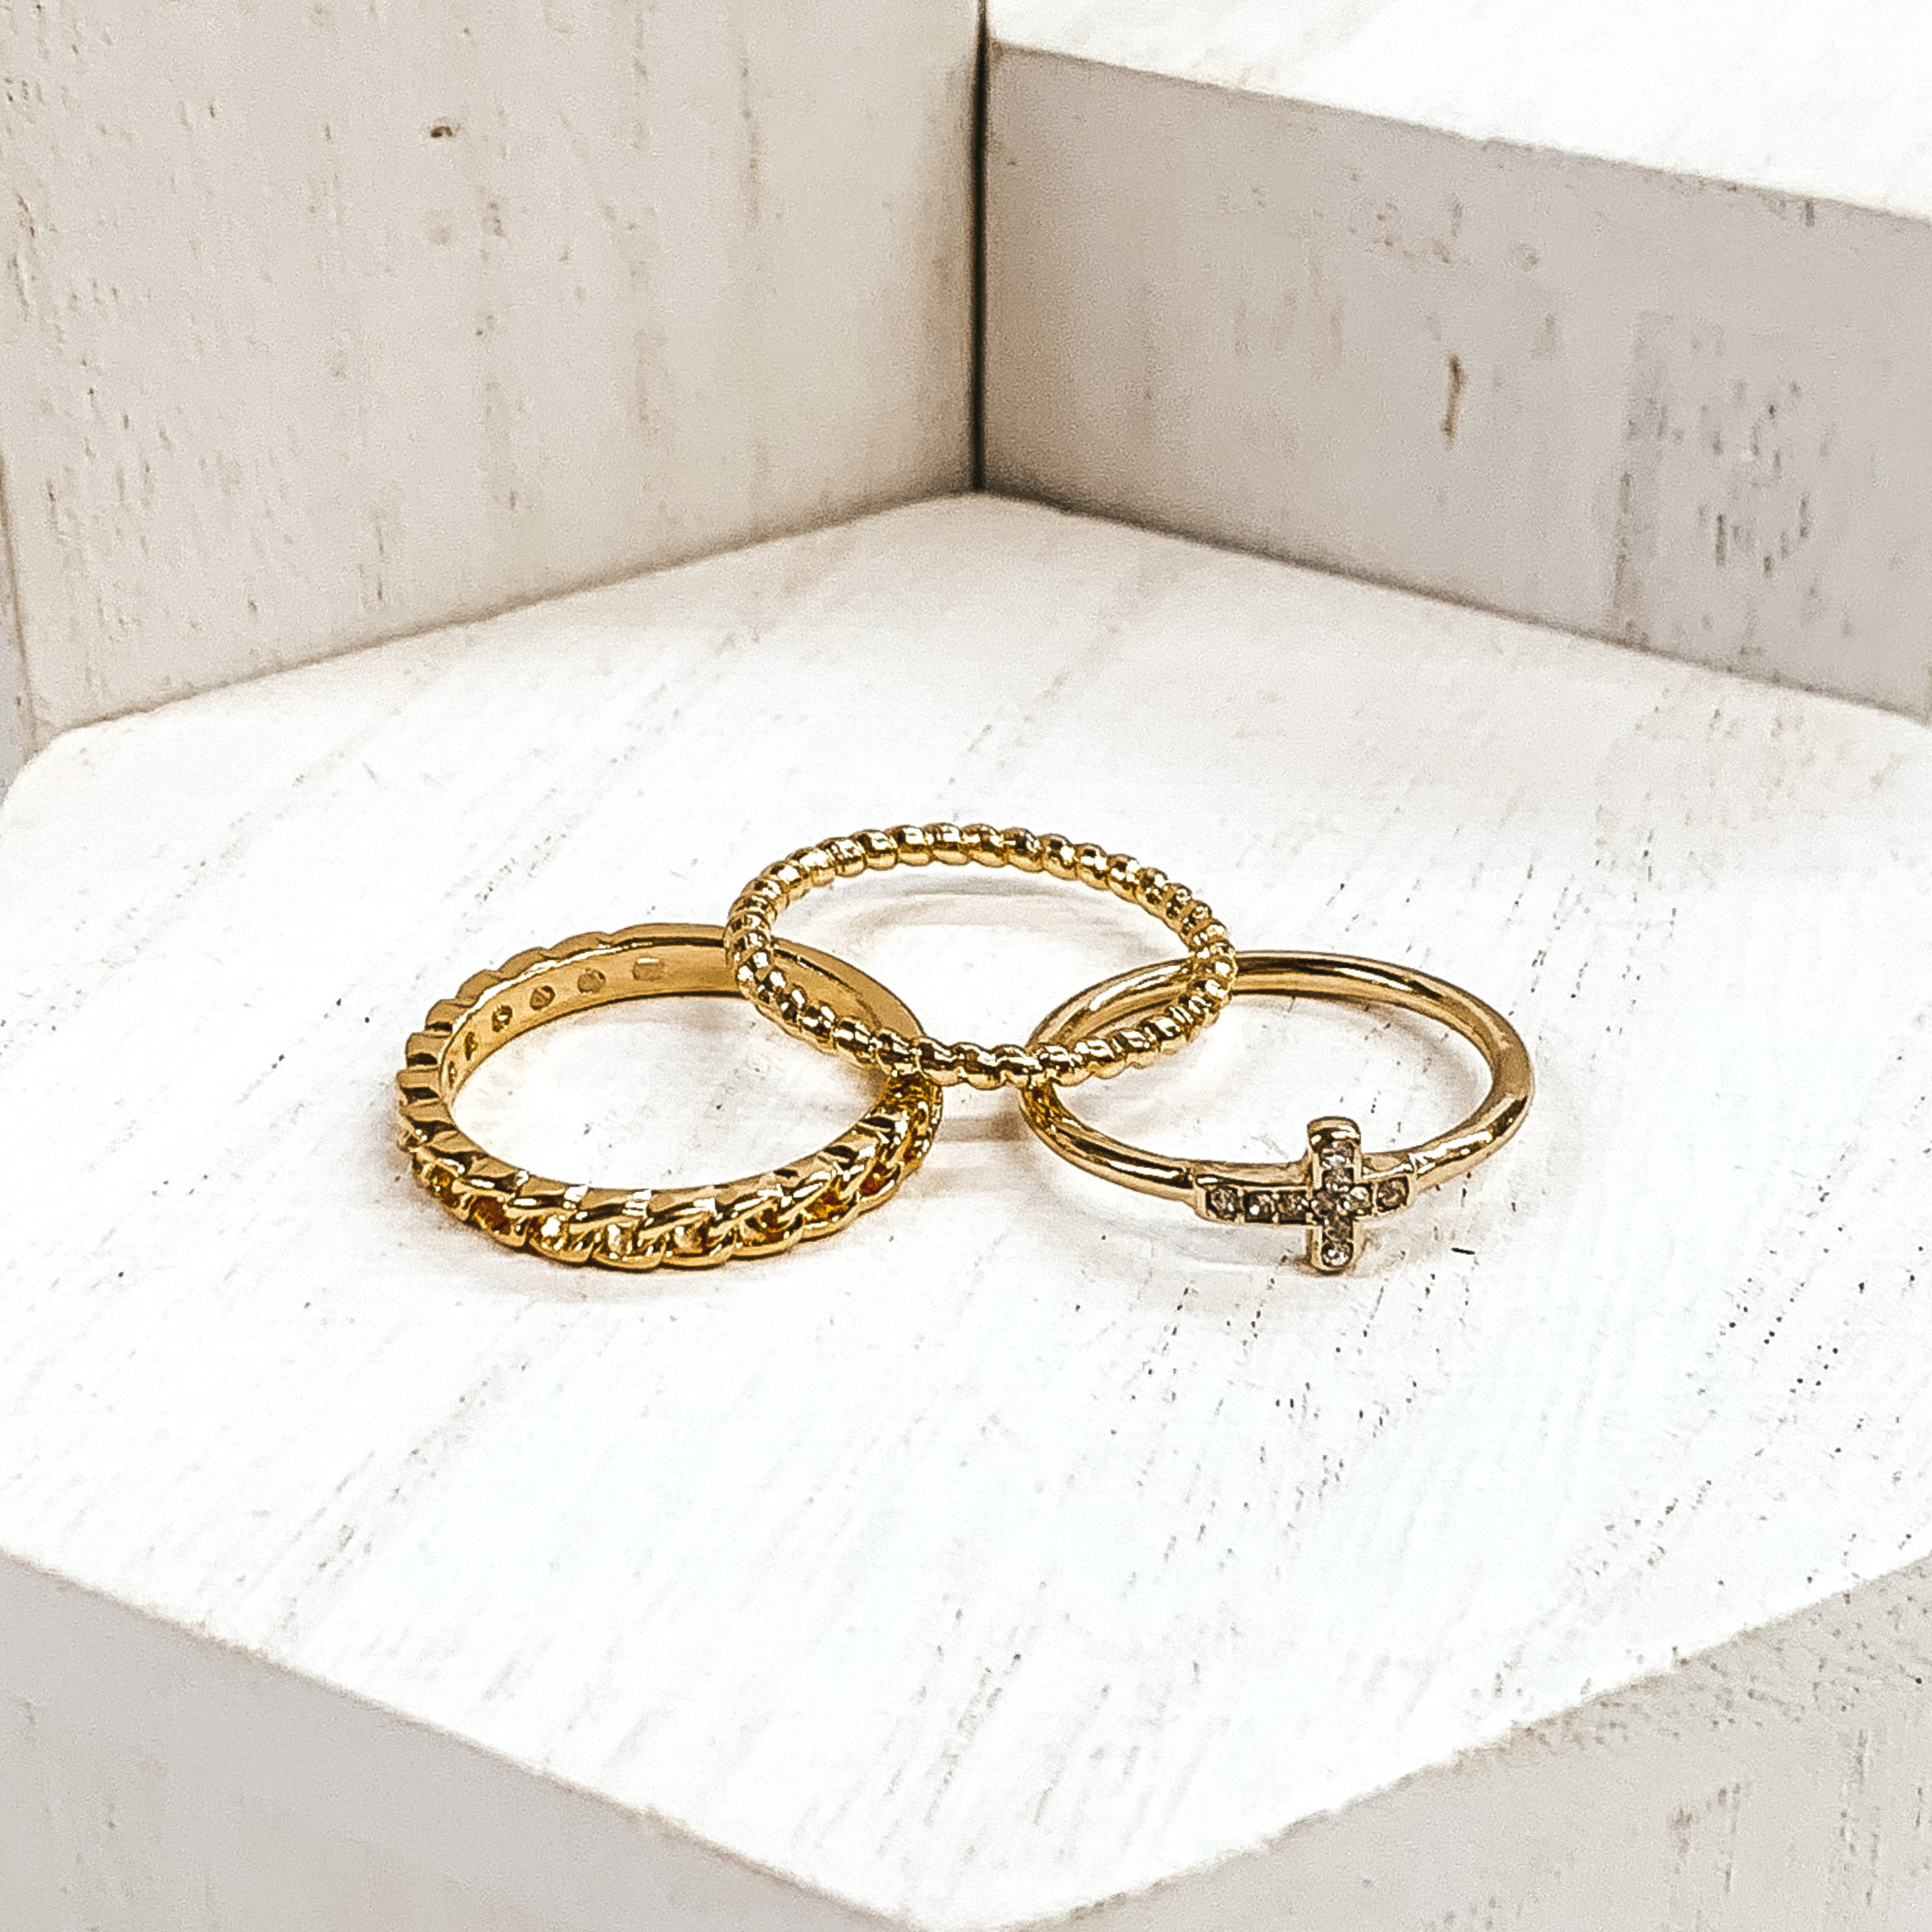 Set of three gold rings. One ring is a twisted ring, another is a half chained ring, and the last ring has a cross pendant that has clear crystals. These rings are pictured on white blocks. 